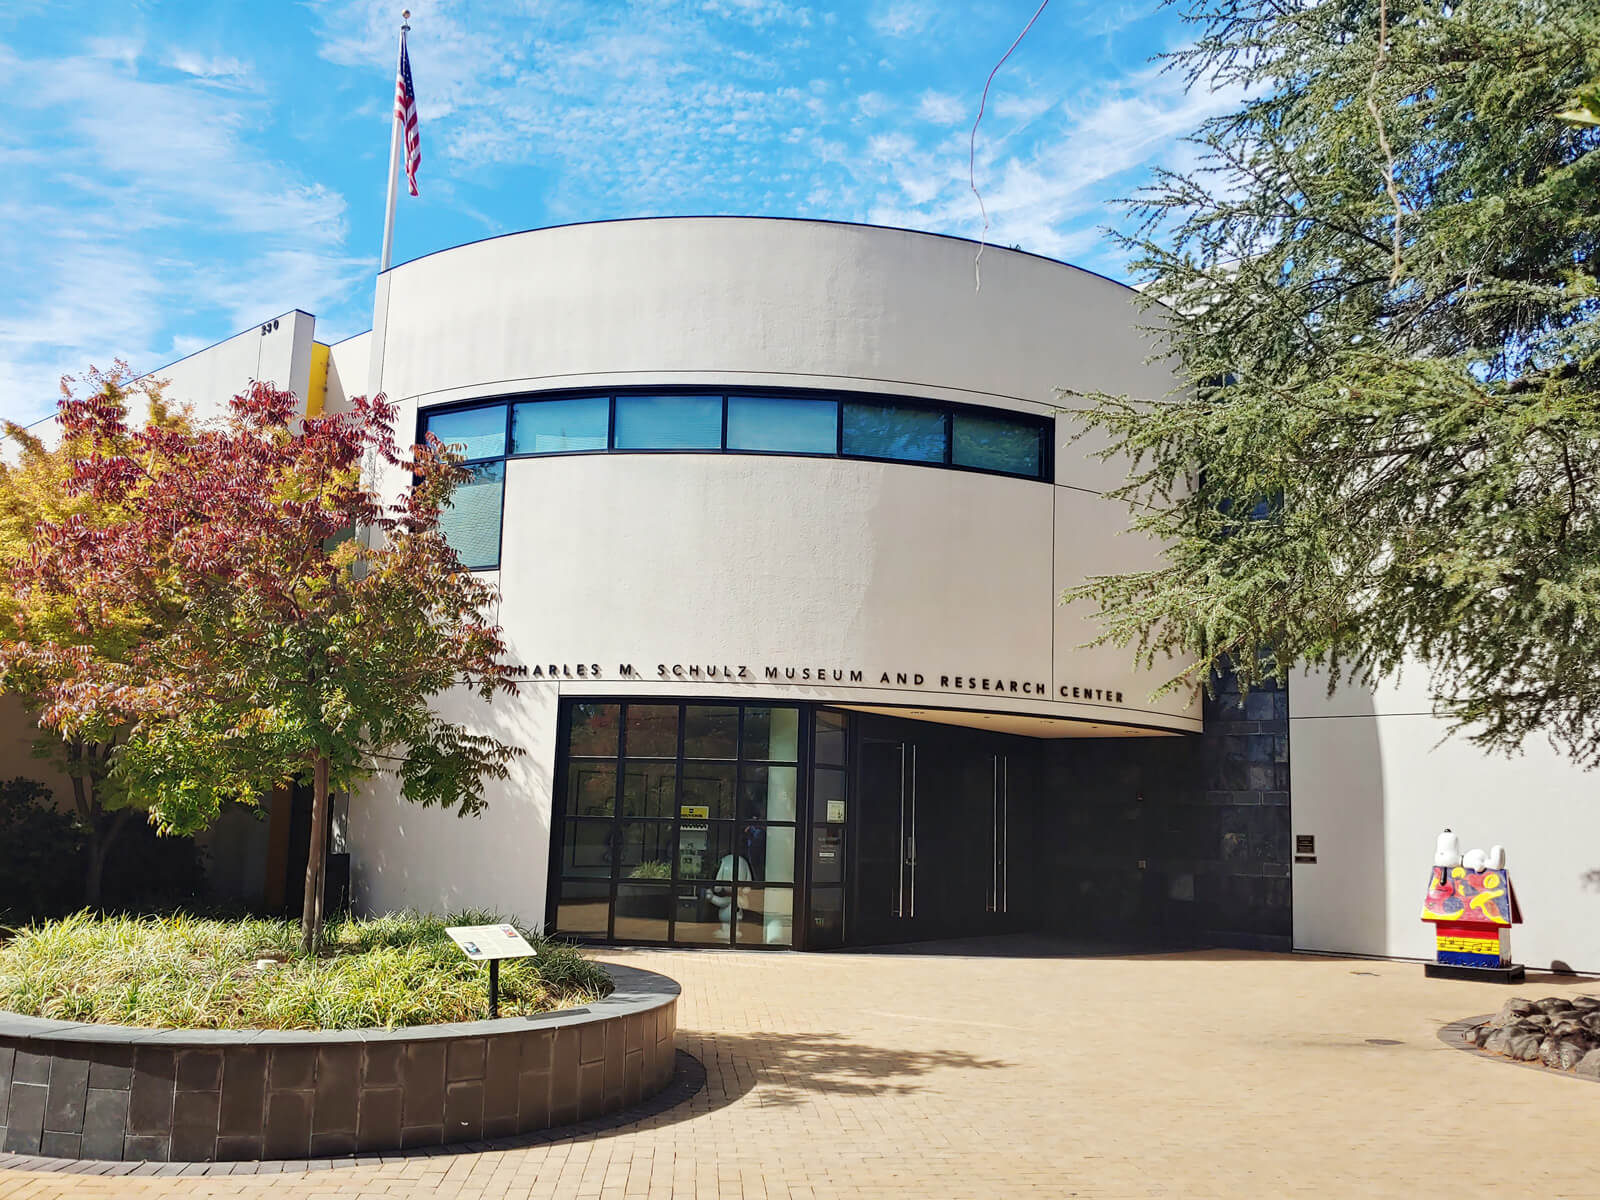 Charles M. Schulz Museum and Research Center entrance